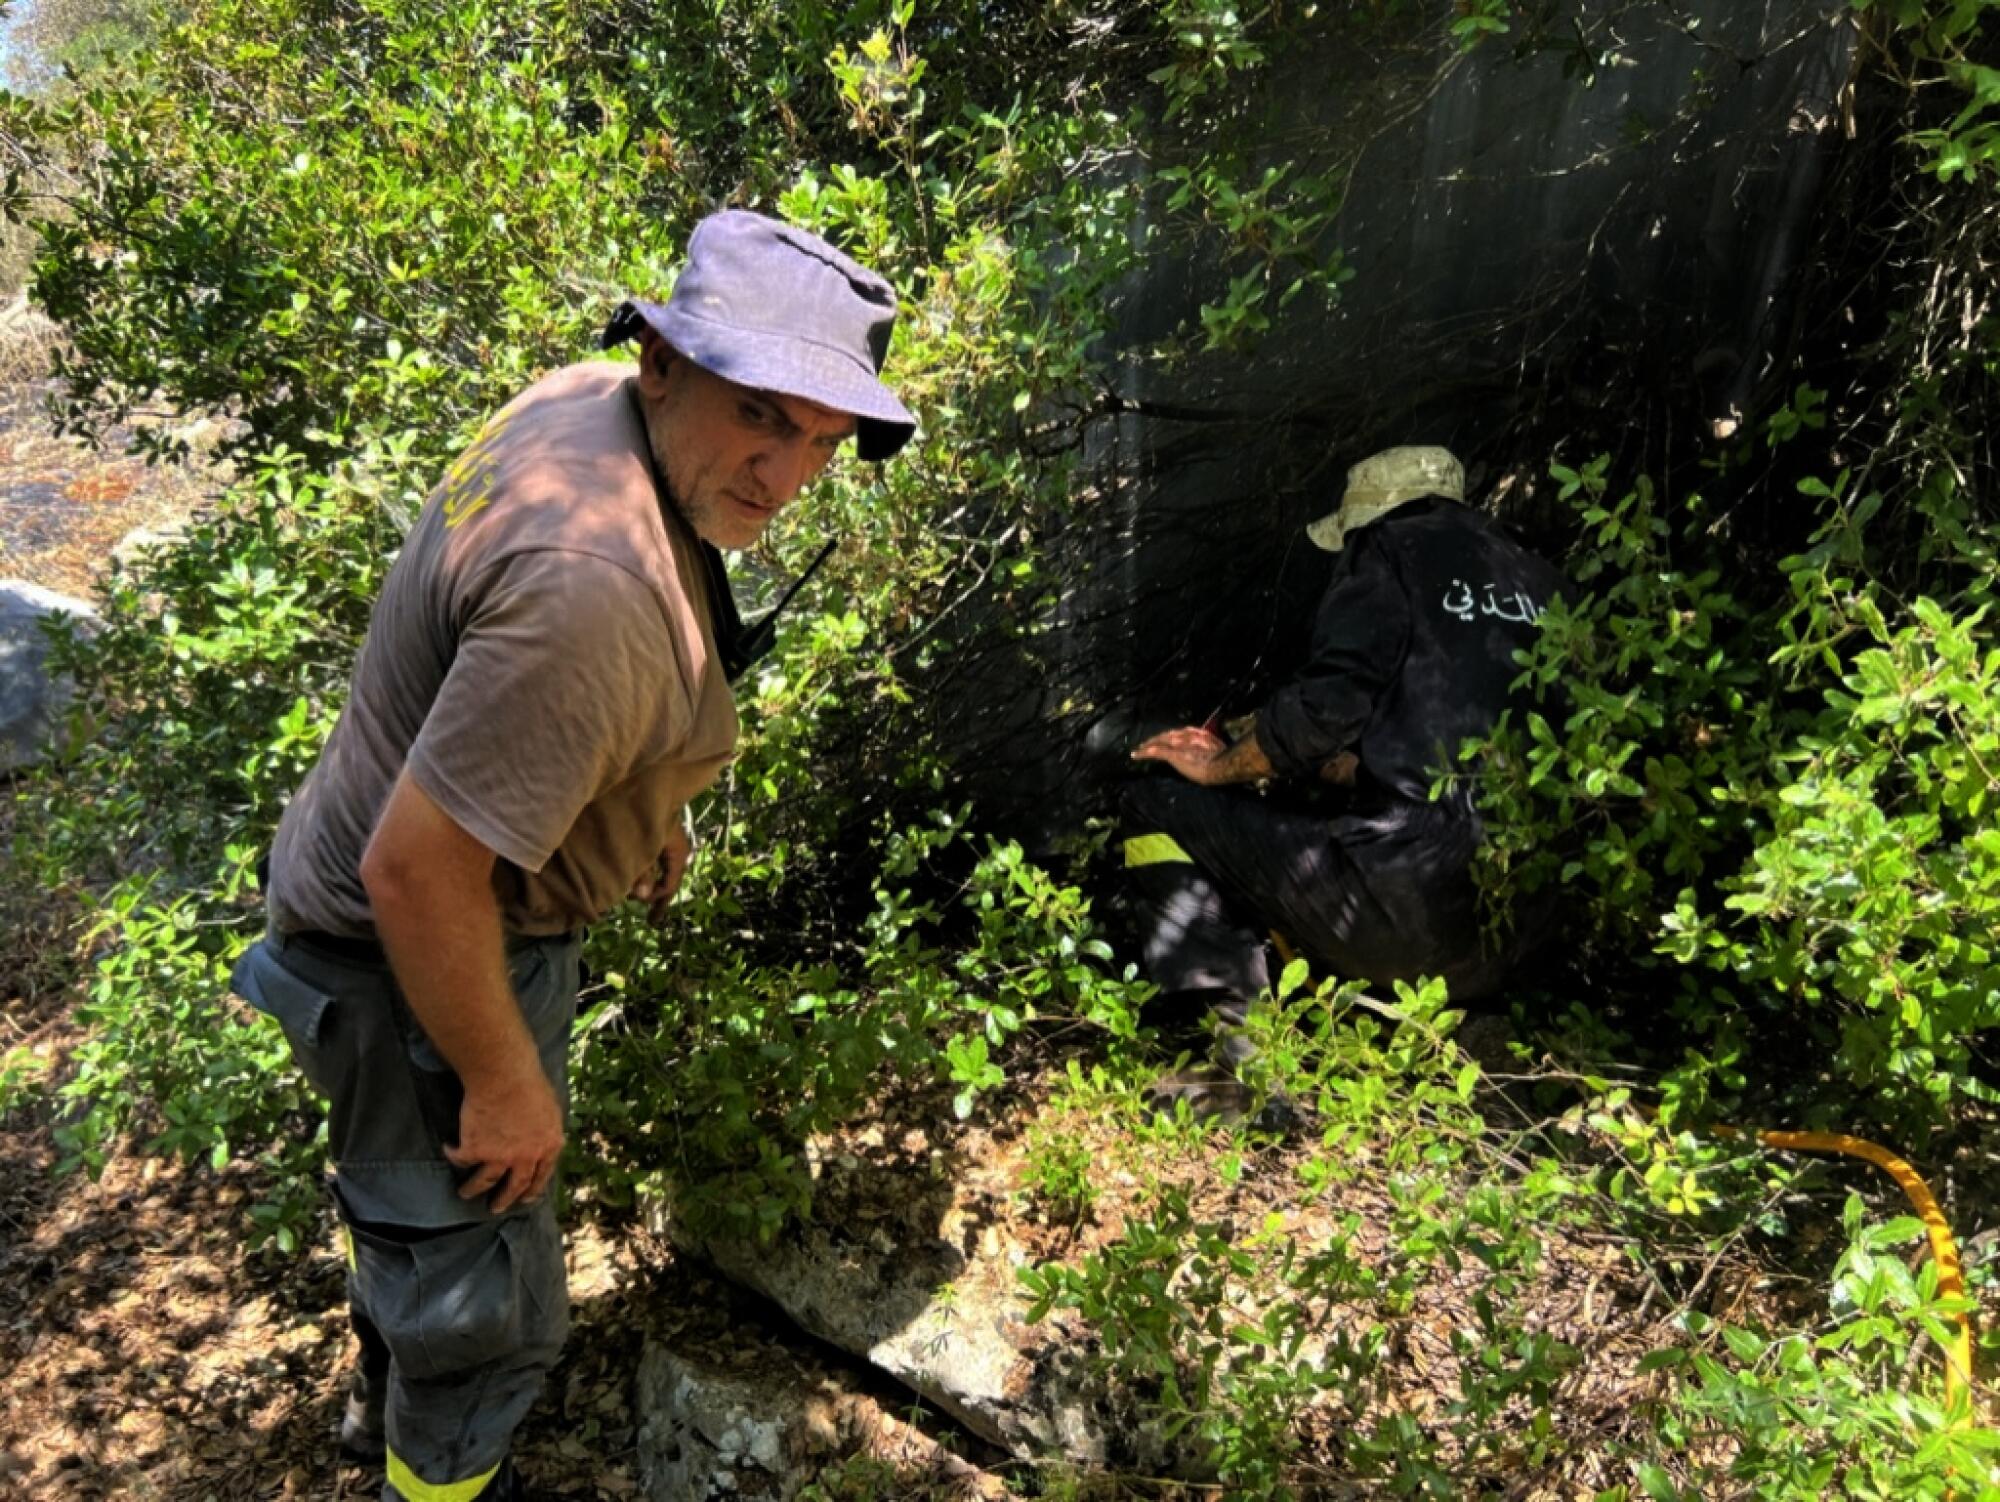 Men wearing floppy hats put out a small fire in a brushy, wooded area.